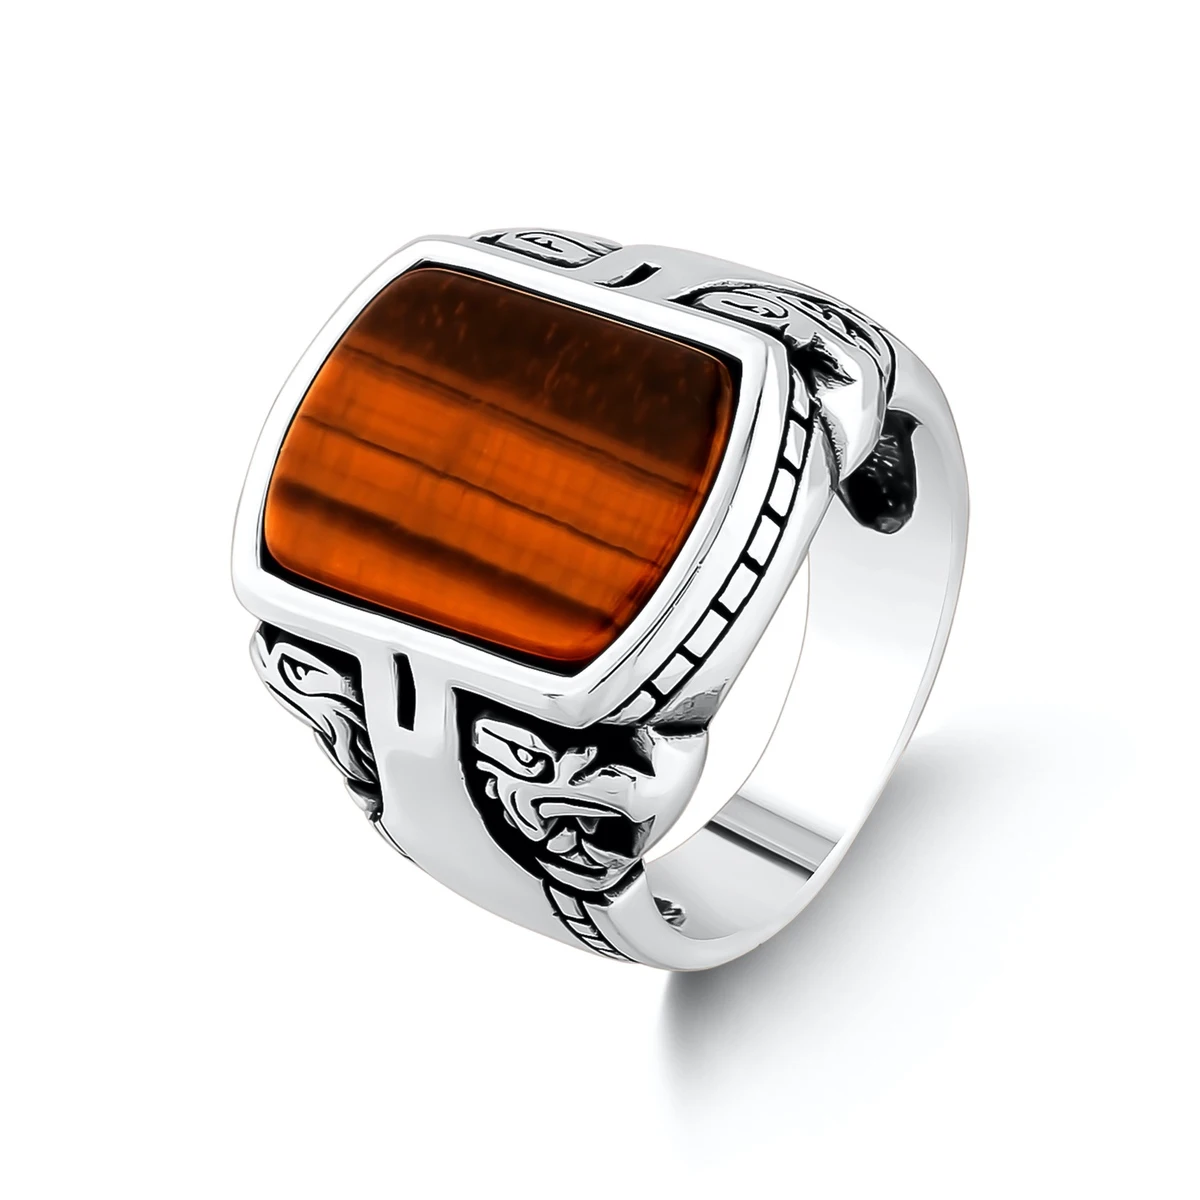 Double Eagle Model Oval Brown Tiger Eye Gemstone Silver Men Ring High Quality Fashionable 925 Sterling Silver